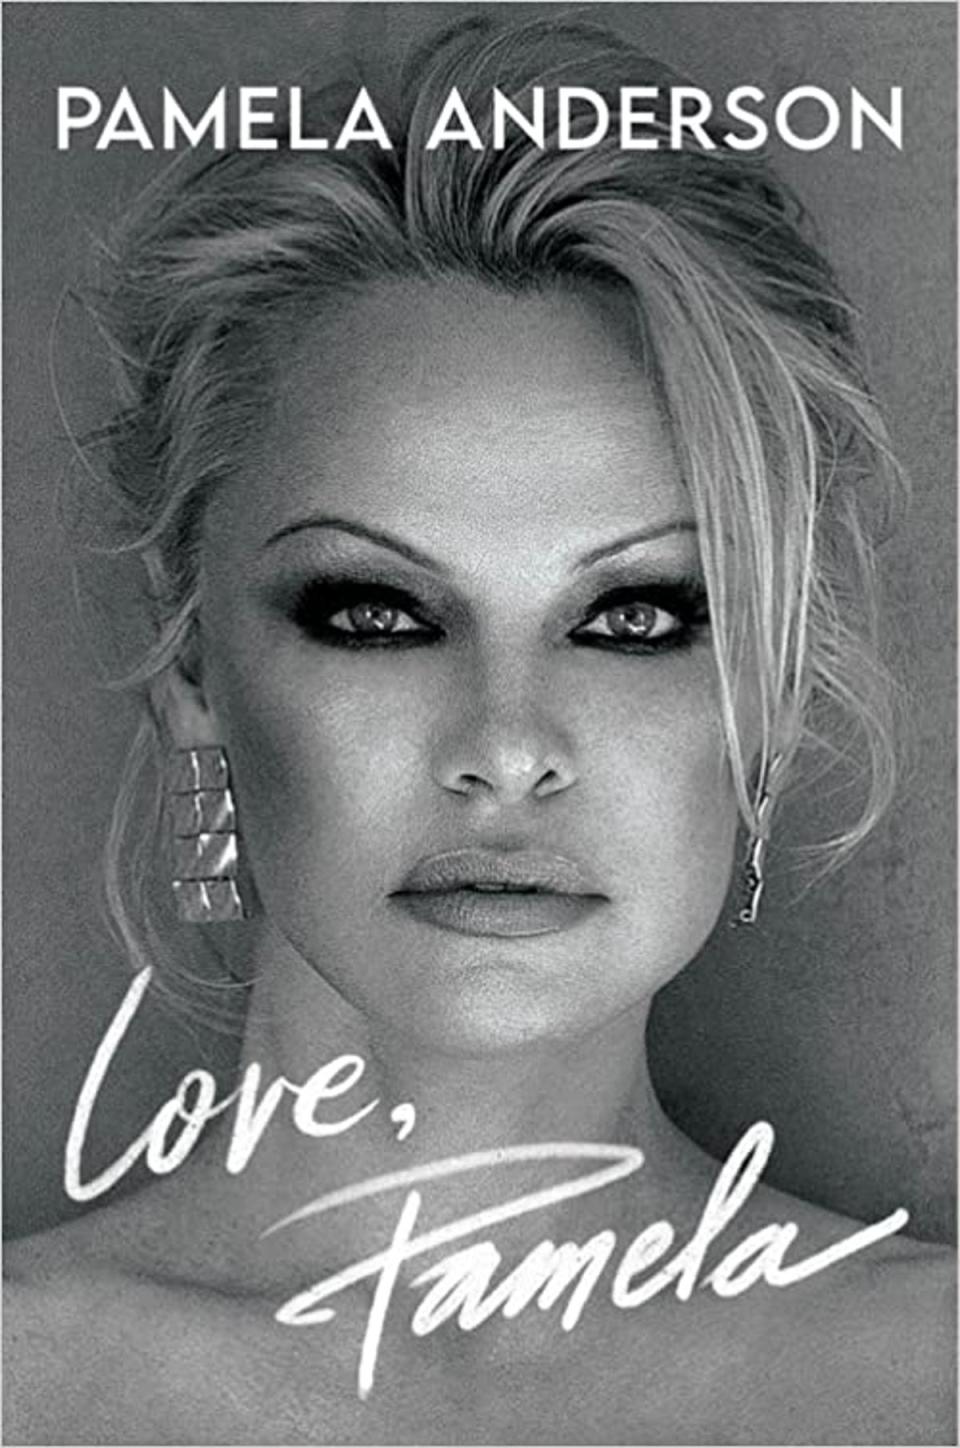 ‘Love, Pamela’ will be released on 31 January (Harper Collins)